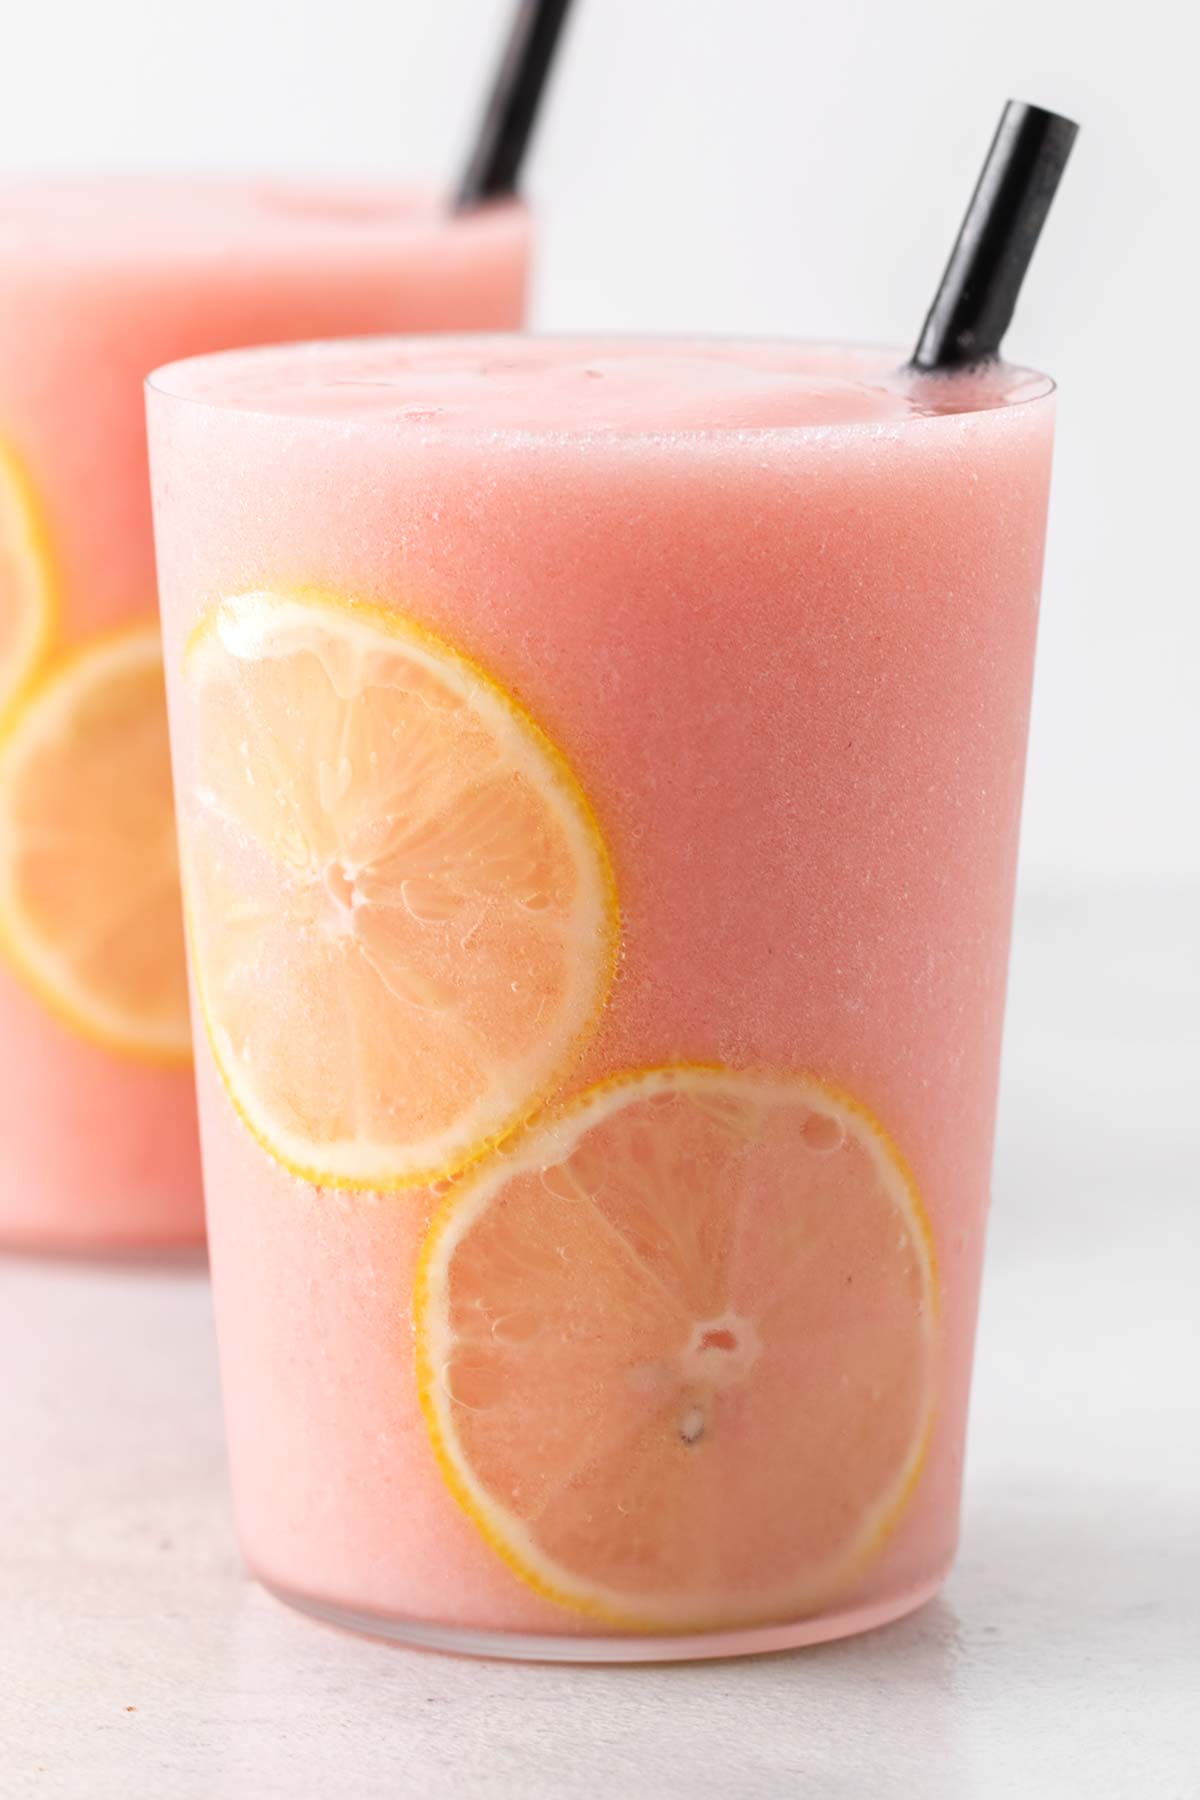 Frozen strawberry lemonade in a glass with a black straw.